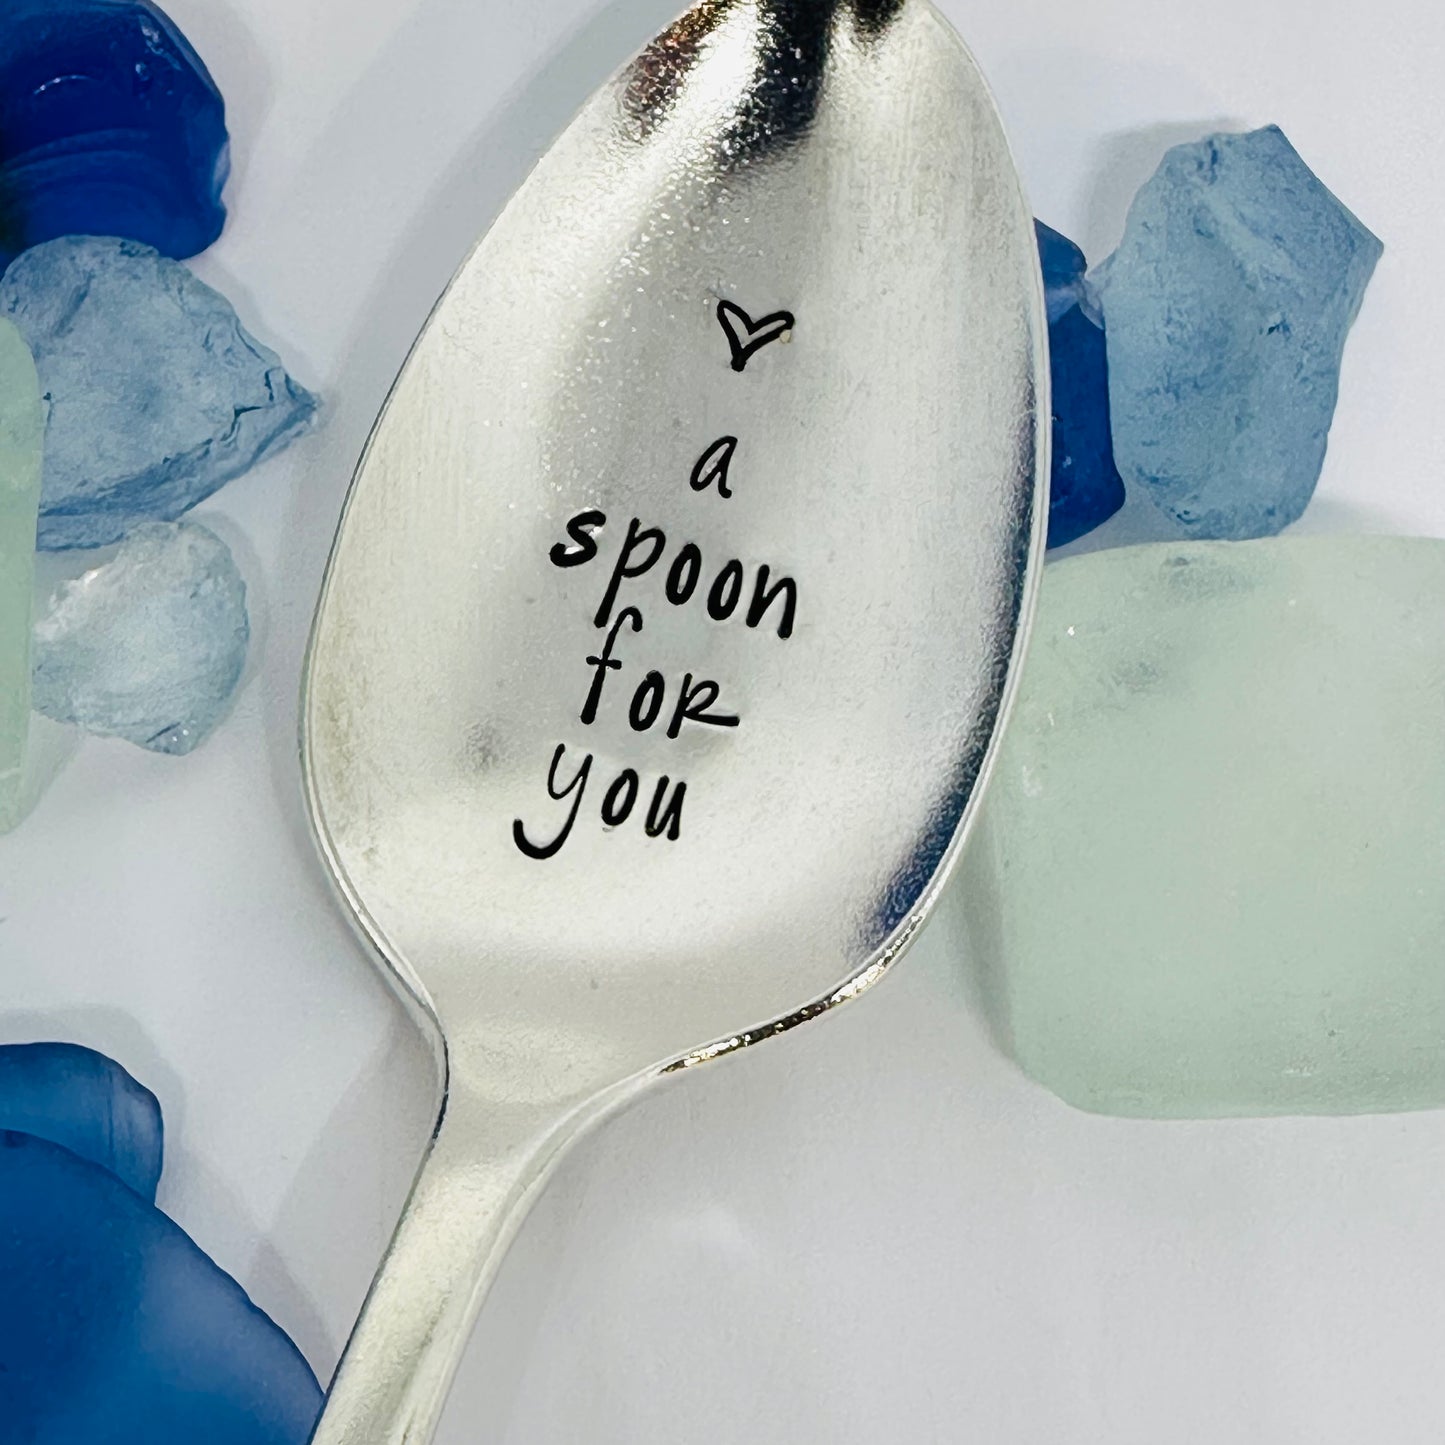 “A Spoon for You" Vintage Silverplated Hand Stamped Spoon | Novelty | Spoonies | Spoon Theory | Chronic Illness | Disability